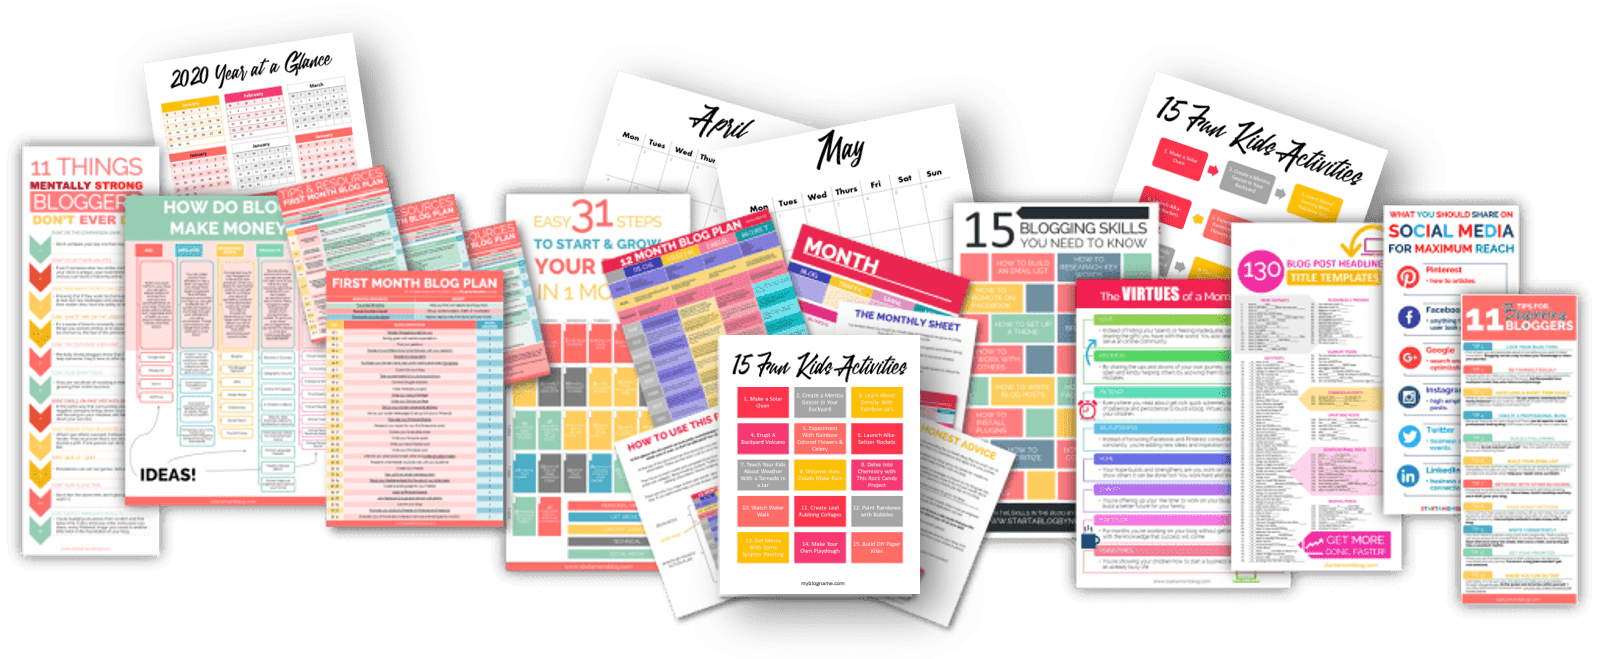  /></p><p>In <strong>Printables by Number</strong> I’ll teach you how:</p><ul><li>To use 3 different programs to create printables</li></ul><p>The Power of PowerPoint</p><ul><li><strong>In depth focus on creating printables in PowerPoint – OFFICE 365</strong><ul><li>How to set <strong>default templates</strong></li><li>How to import a <strong>fancy font</strong></li><li>How to make a <strong>weekly, monthly and yearly calendar</strong></li><li>How to create pretty presentations</li><li>How to <strong>create infographics</strong></li><li>How to <strong>make a 3D layflat overlay image</strong> (these images increase conversions!)</li></ul></li></ul><p><strong>Over the shoulder videos </strong>exactly how I create printables, presentations and infographics to grow my traffic. See the thought process I go through to create printables and <strong>follow along step by step.</strong></p><p><img src=